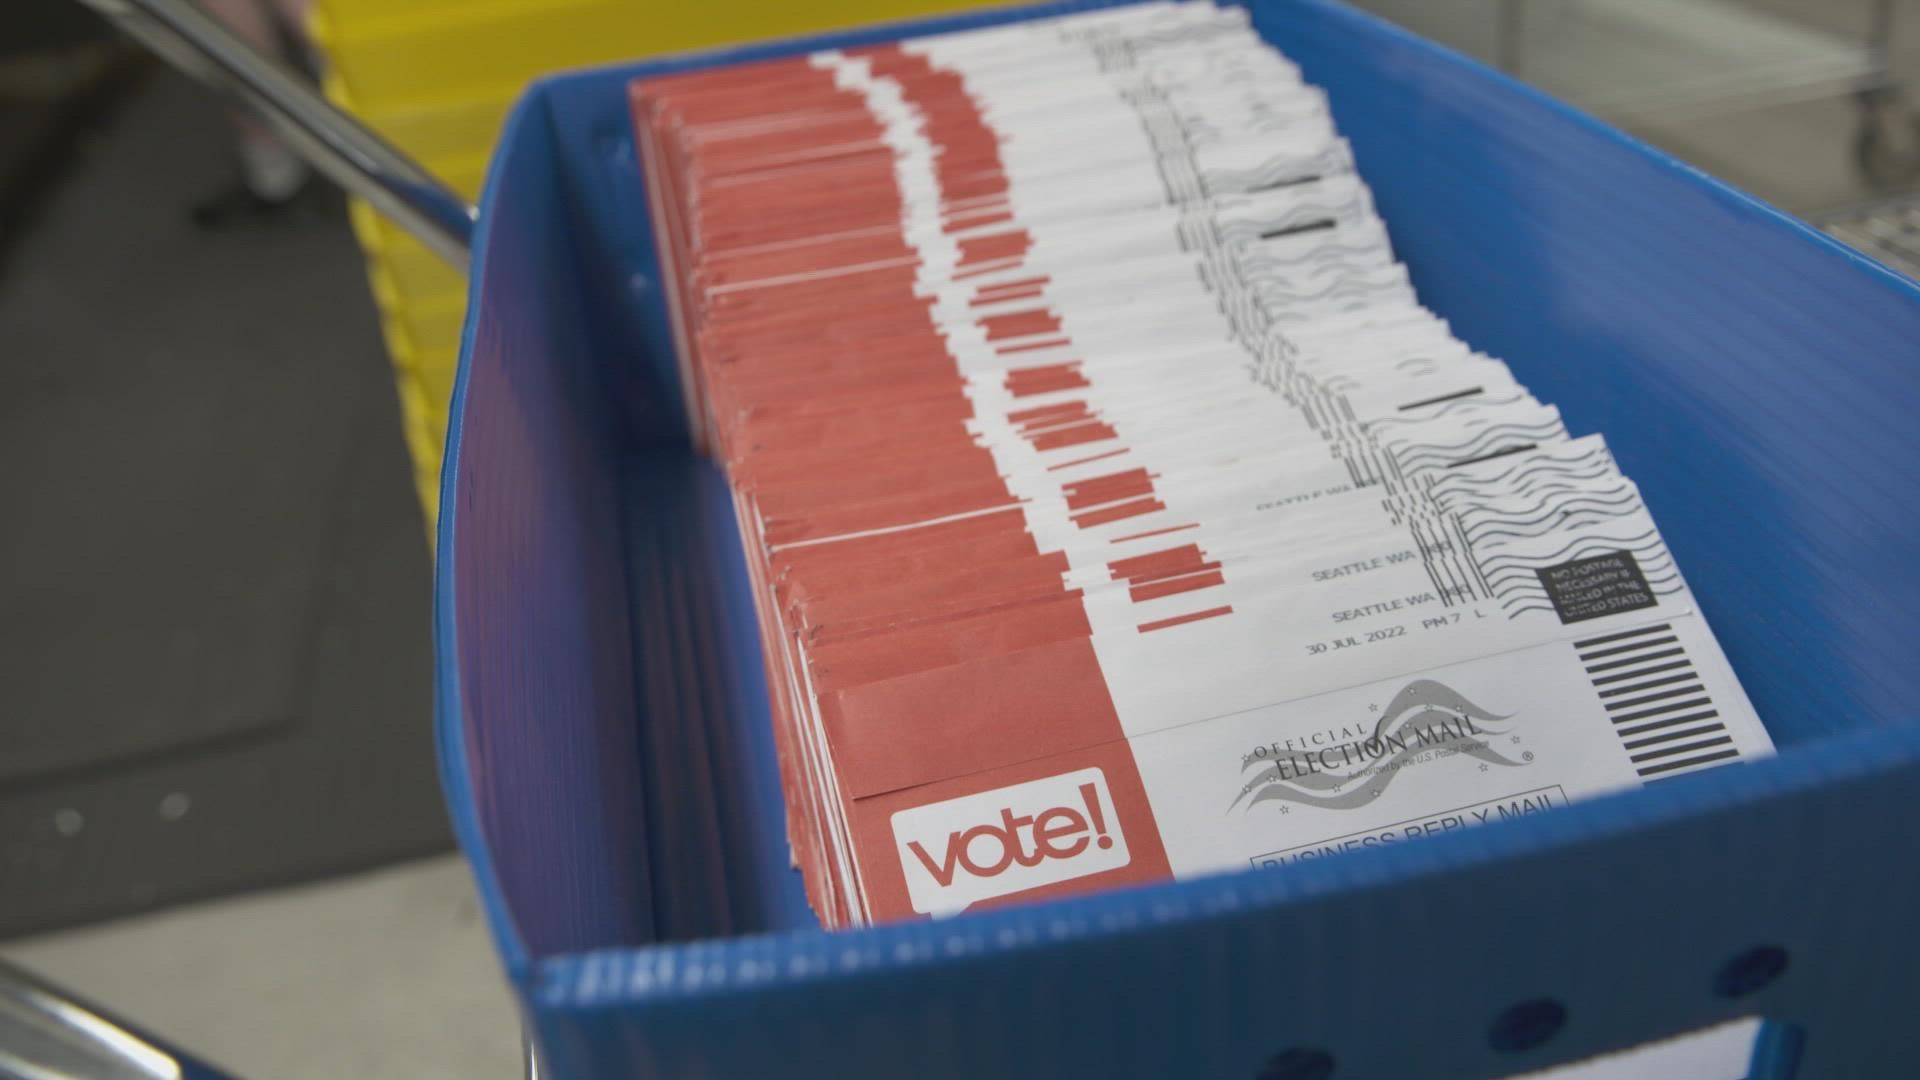 Widespread or organized vote fraud is rare, according to a KING 5 investigation, but one-time violators face unequal justice depending on where they live.